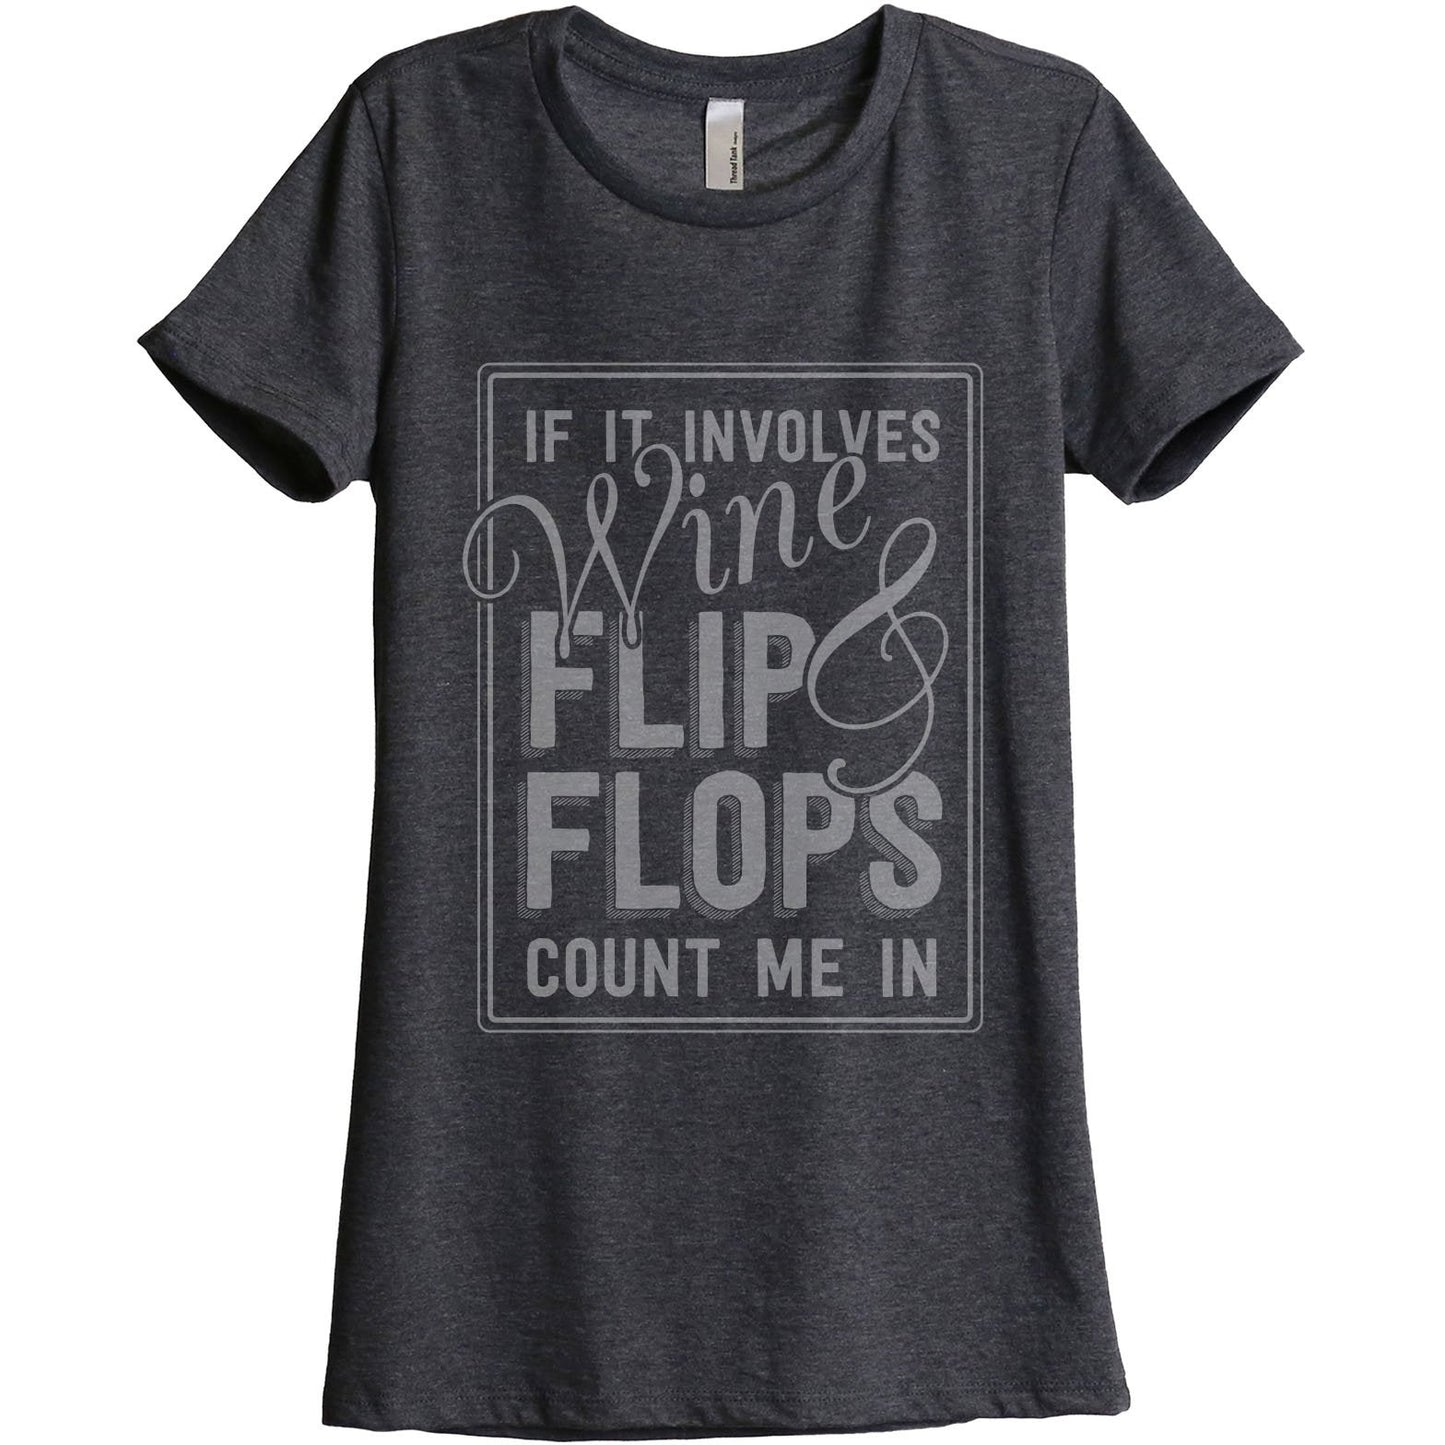 If It Involves Wine And Flip Flops Count Me In Women's Relaxed Crewneck T-Shirt Top Tee Charcoal Grey
